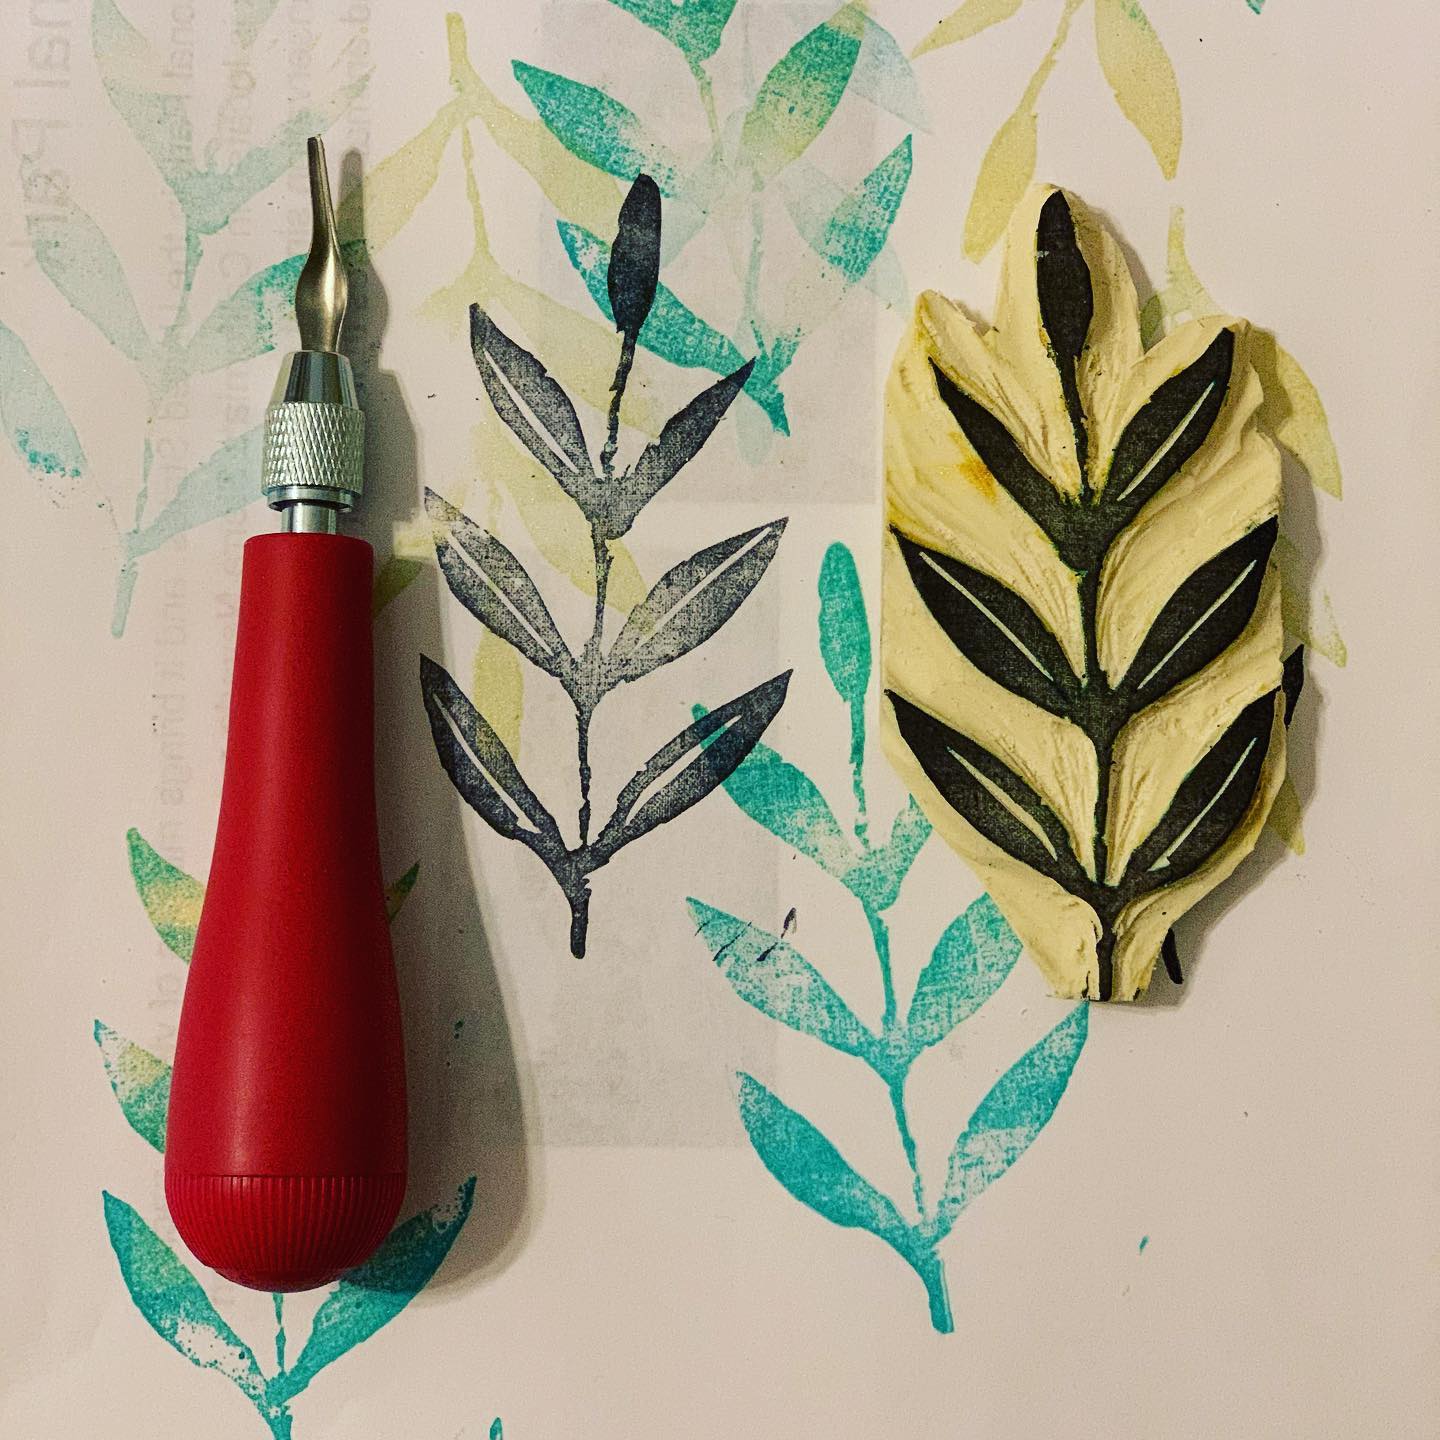 I have always enjoyed stamping in my art journals but never really made my own, here are some leafy impressions...